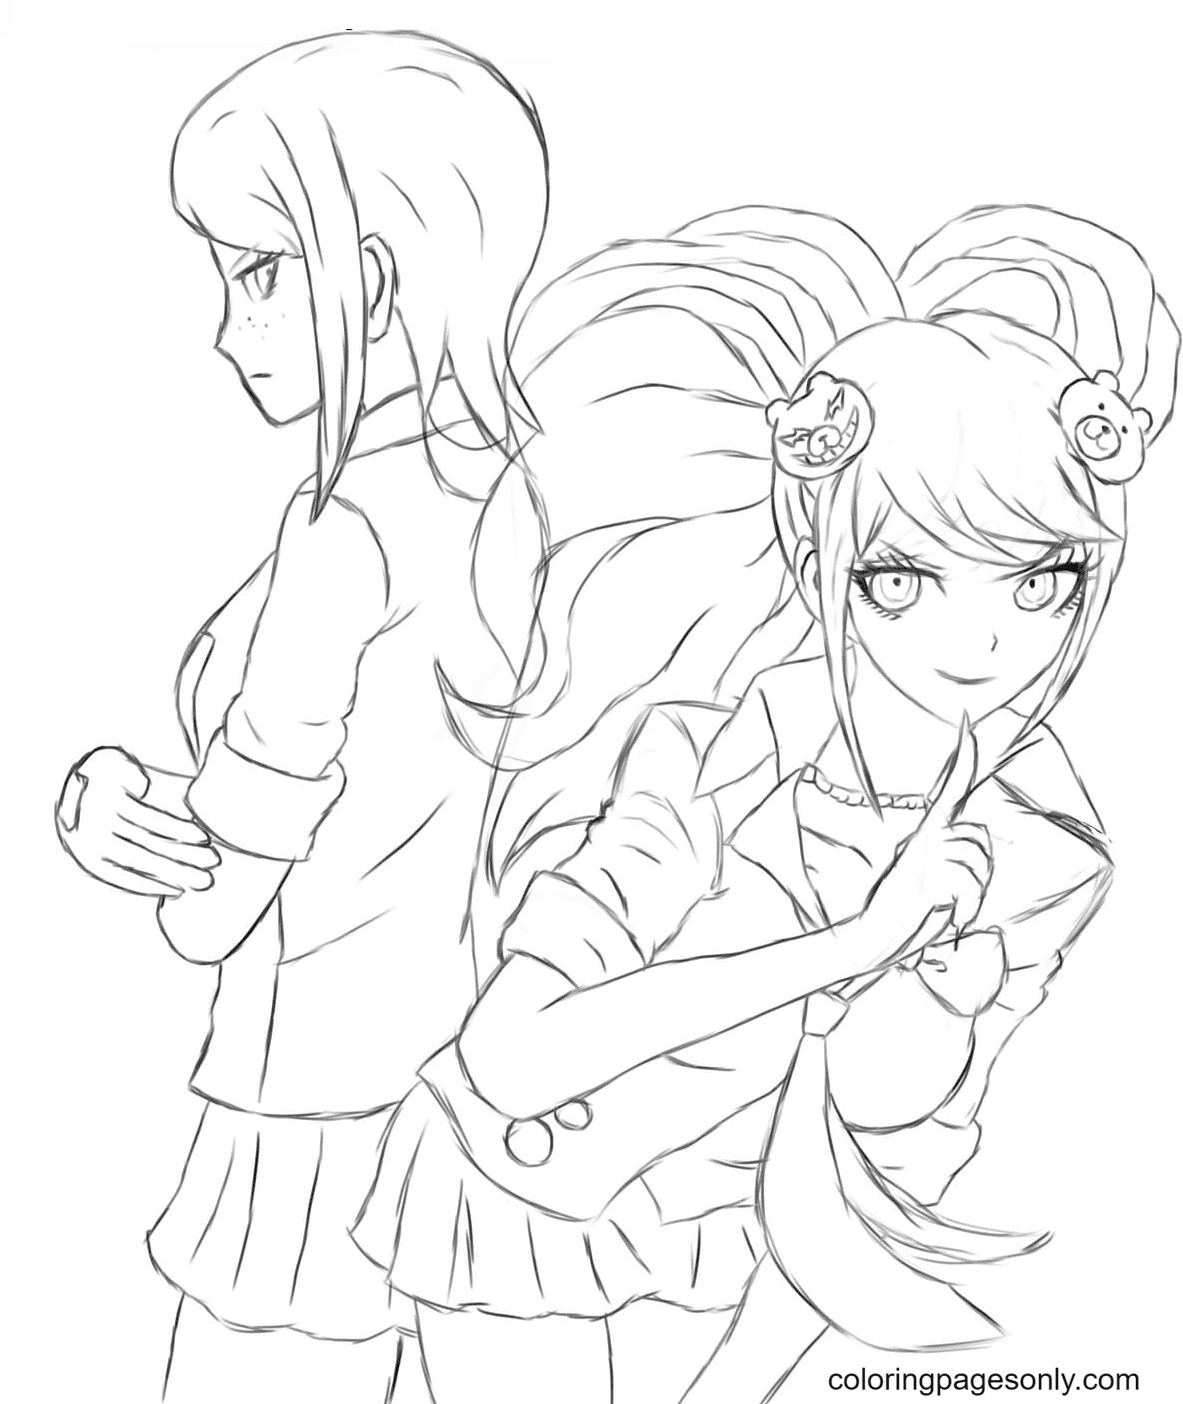 Two characters from Danganronpa Coloring Page